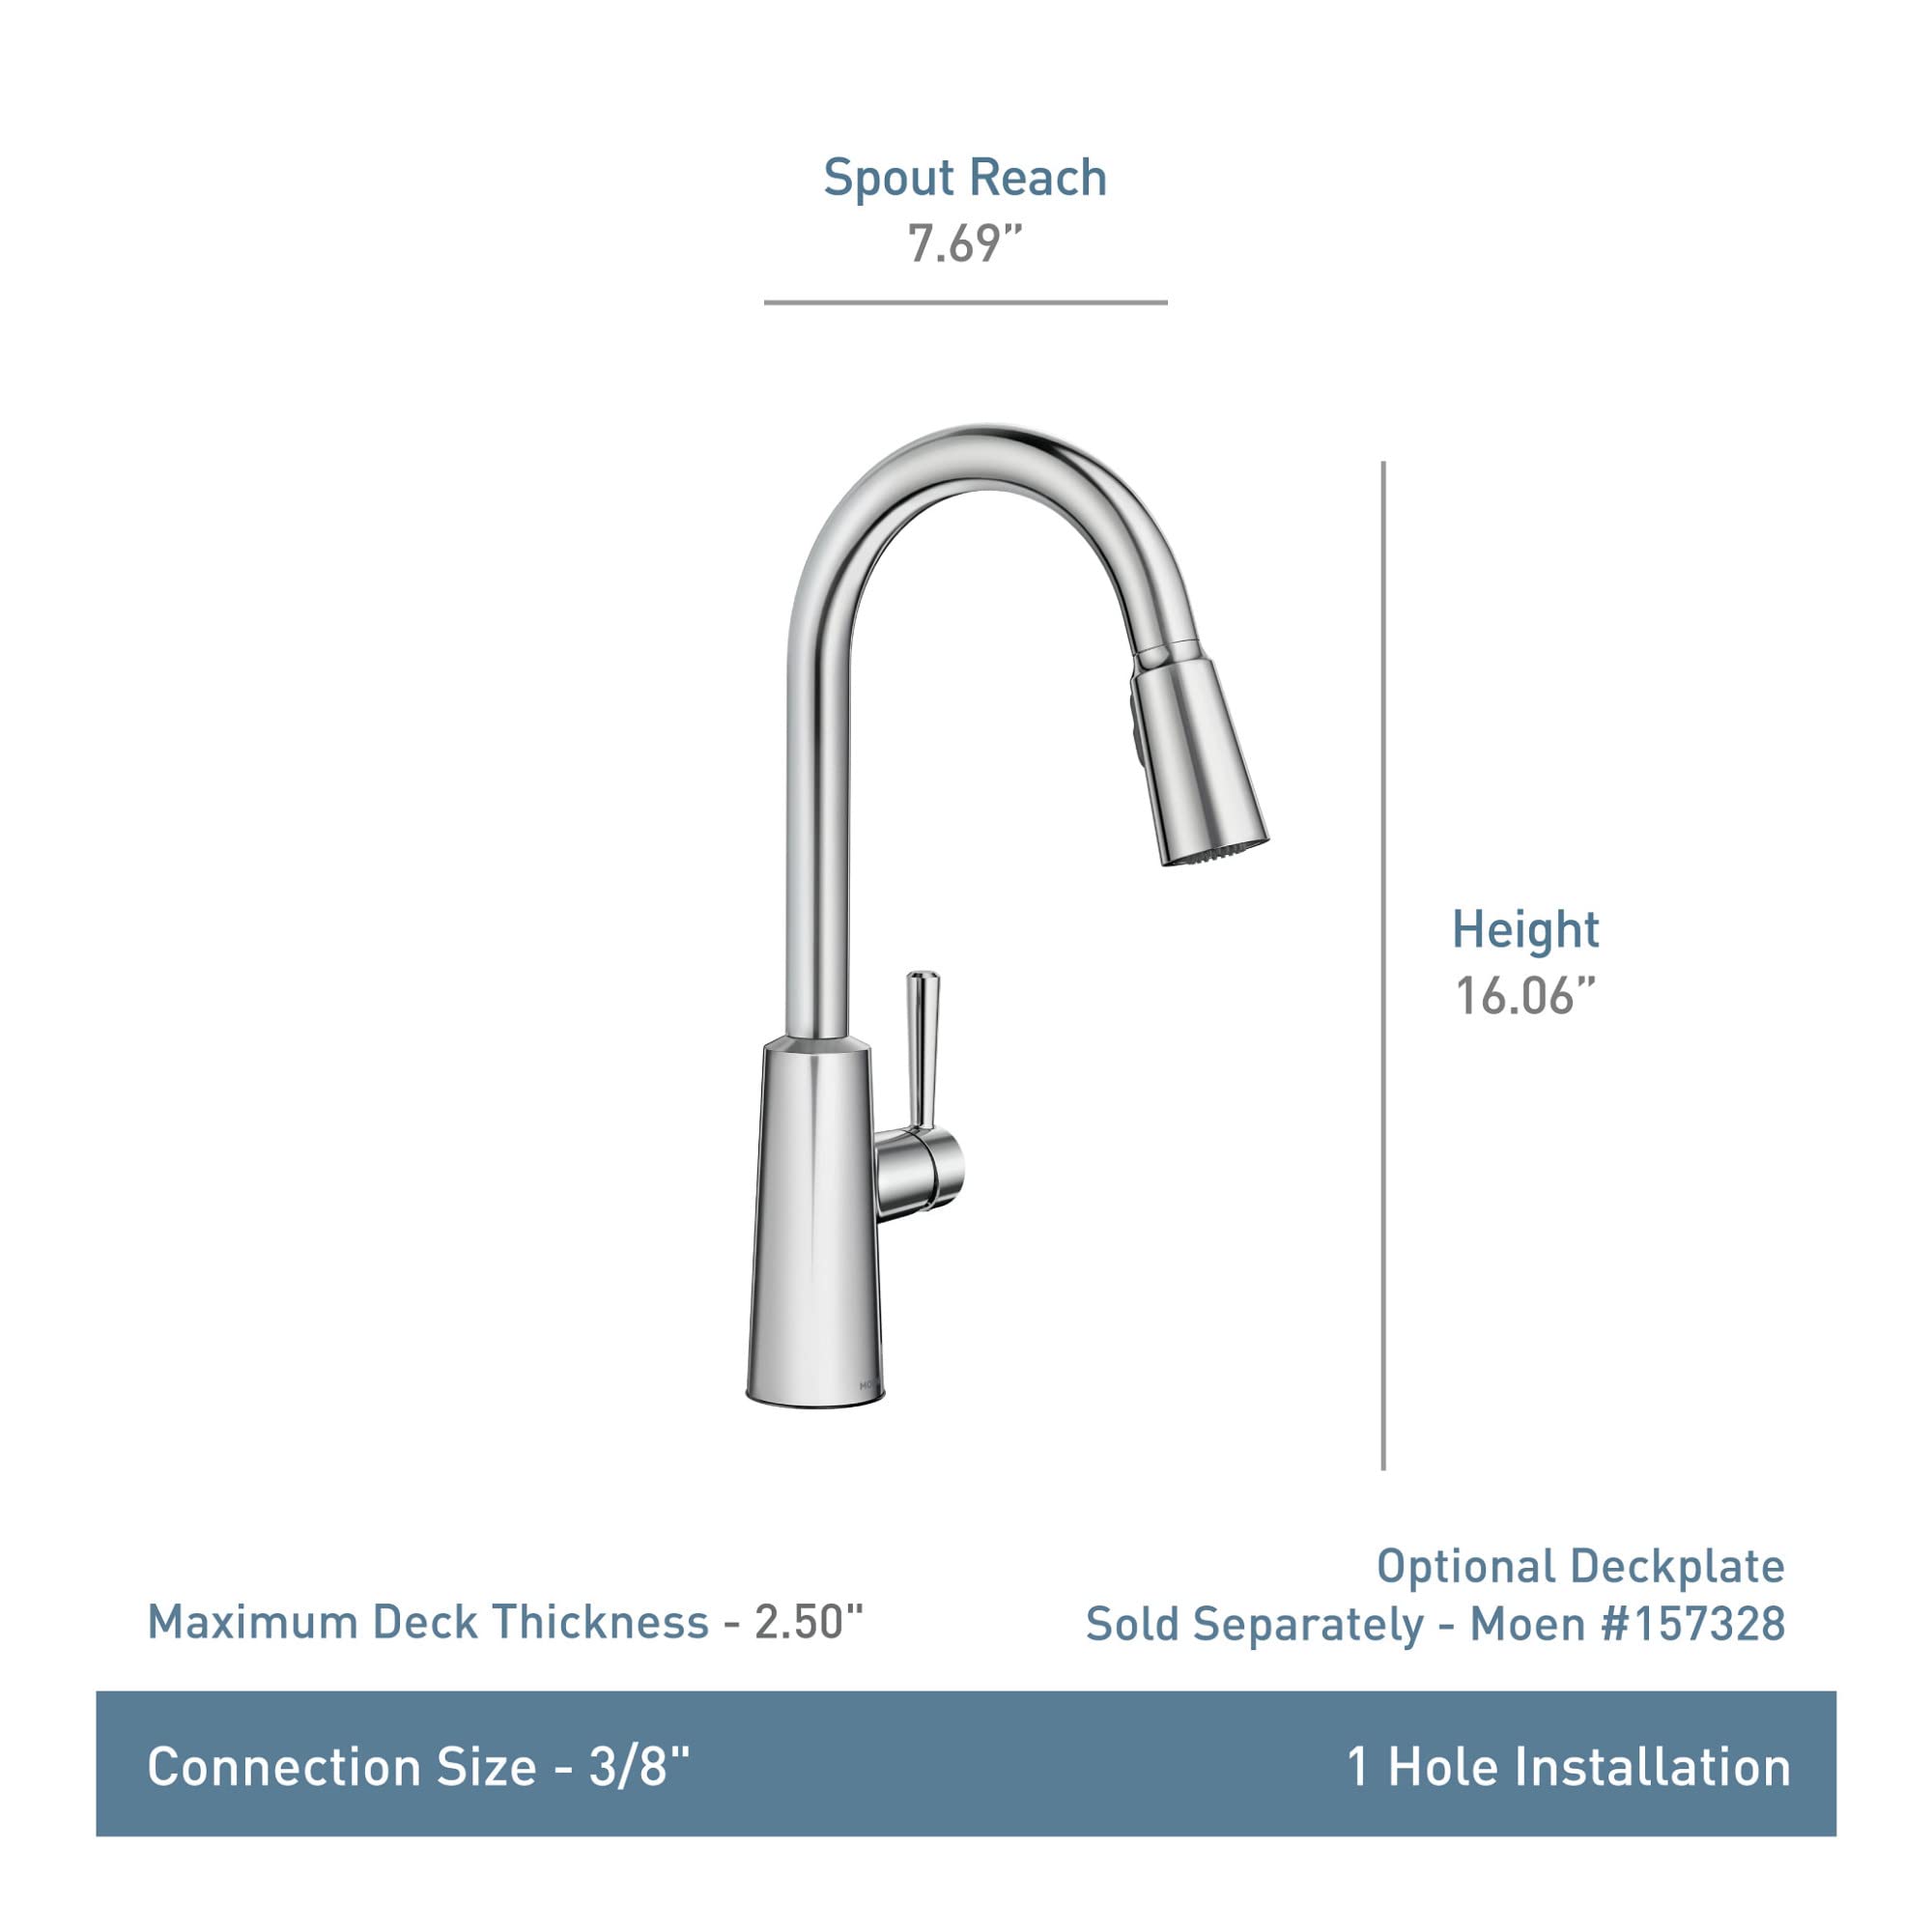 Moen Riley Chrome One-Handle Pulldown Kitchen Faucet Featuring Power Boost for a Faster Clean and Reflex Docking System for the Spray Head, Modern Kitchen Sink Faucet, 7402C